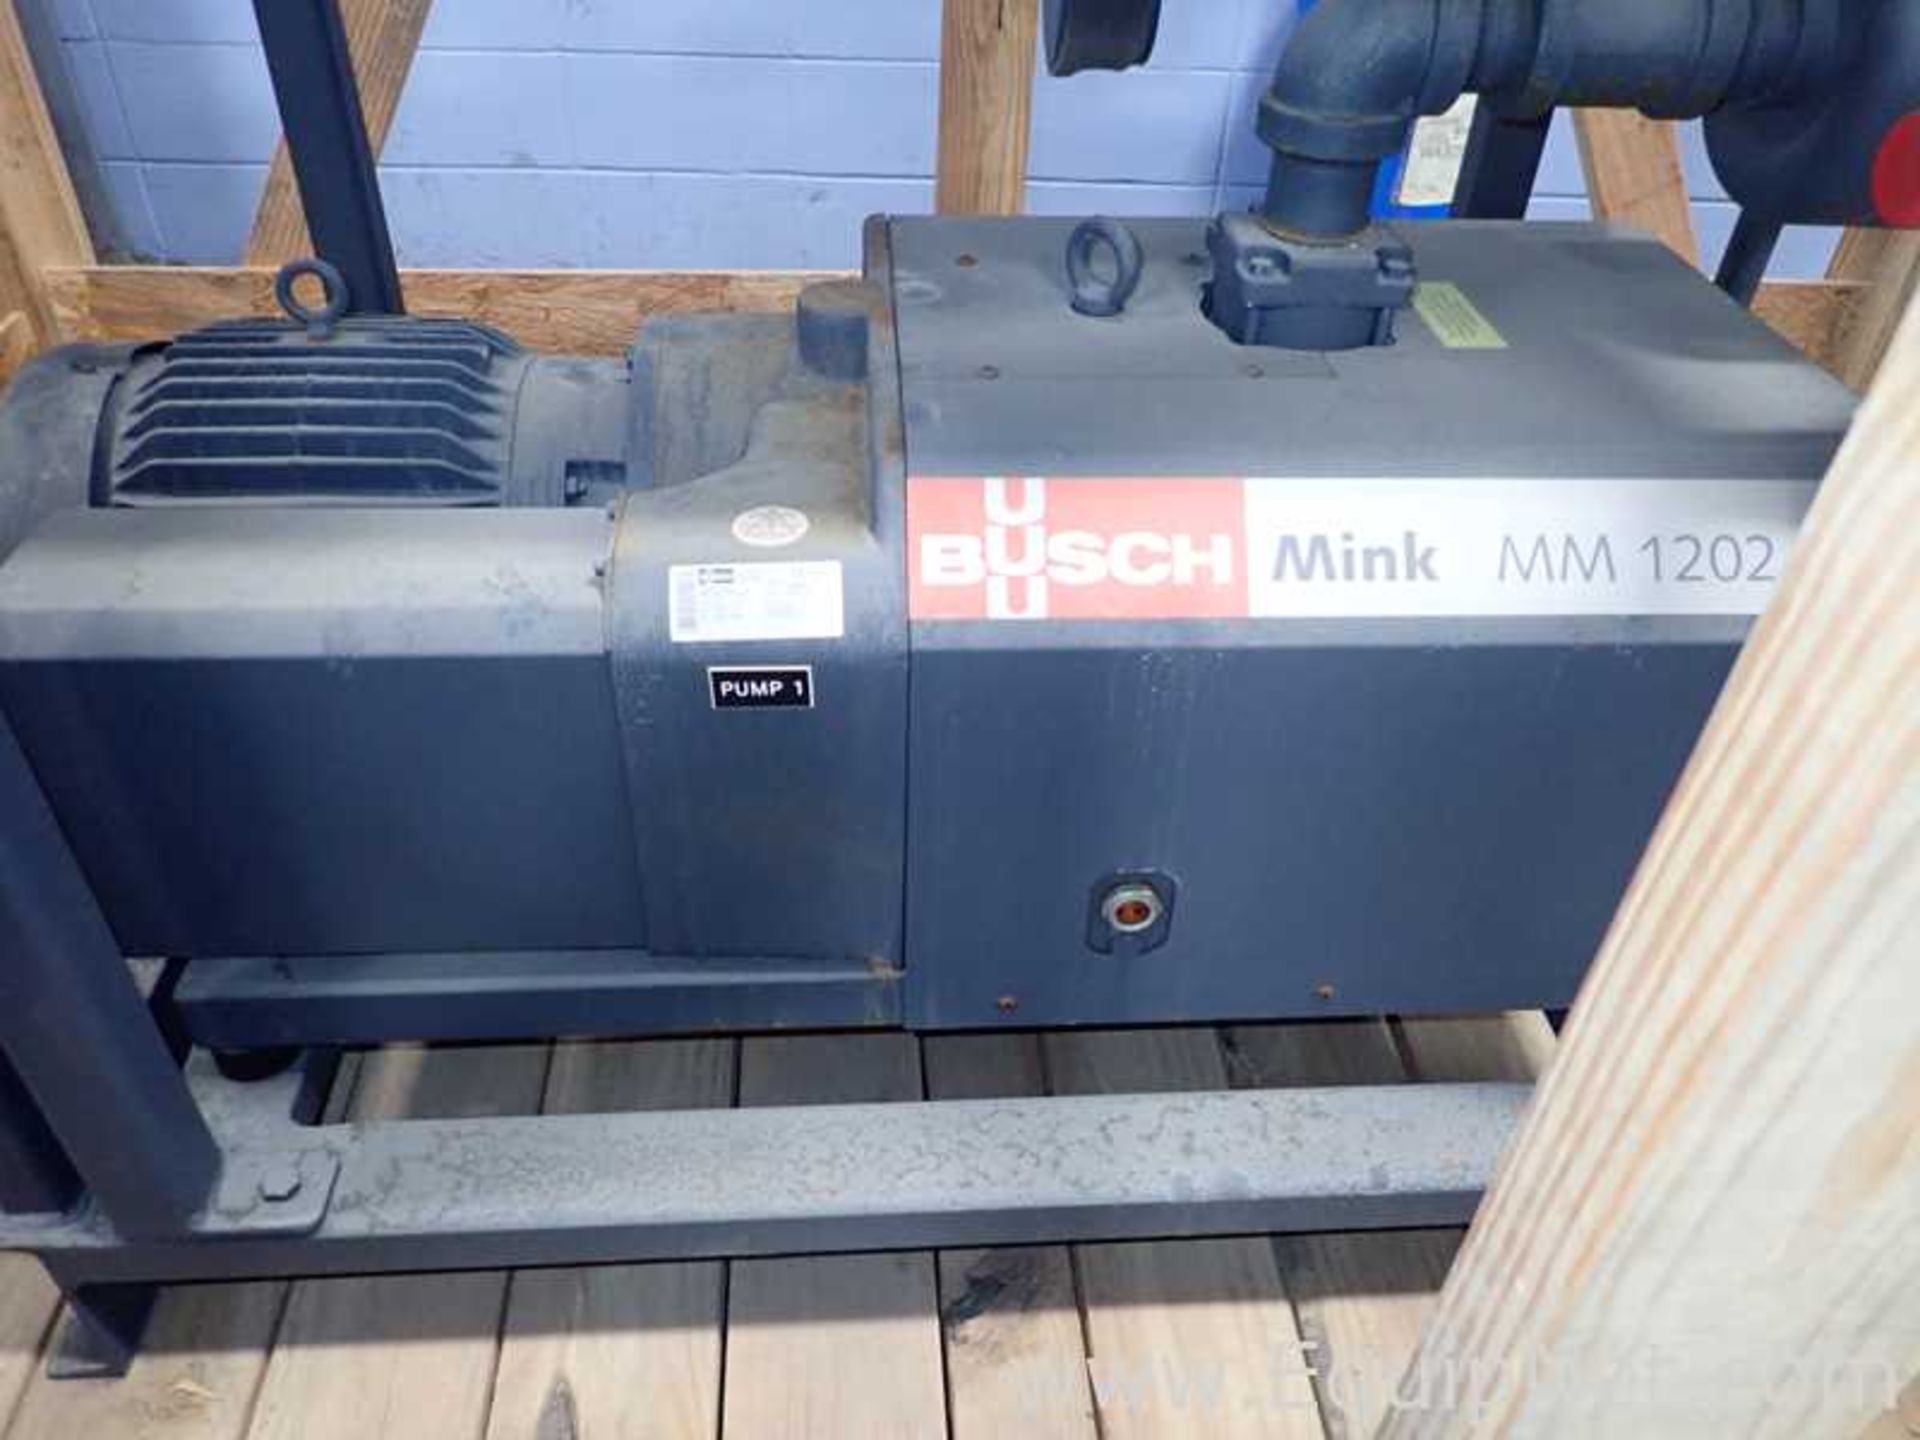 Busch Mink MM 1202AV/V6 Vacuum Pump System with Control Panel and Tank - Image 9 of 17